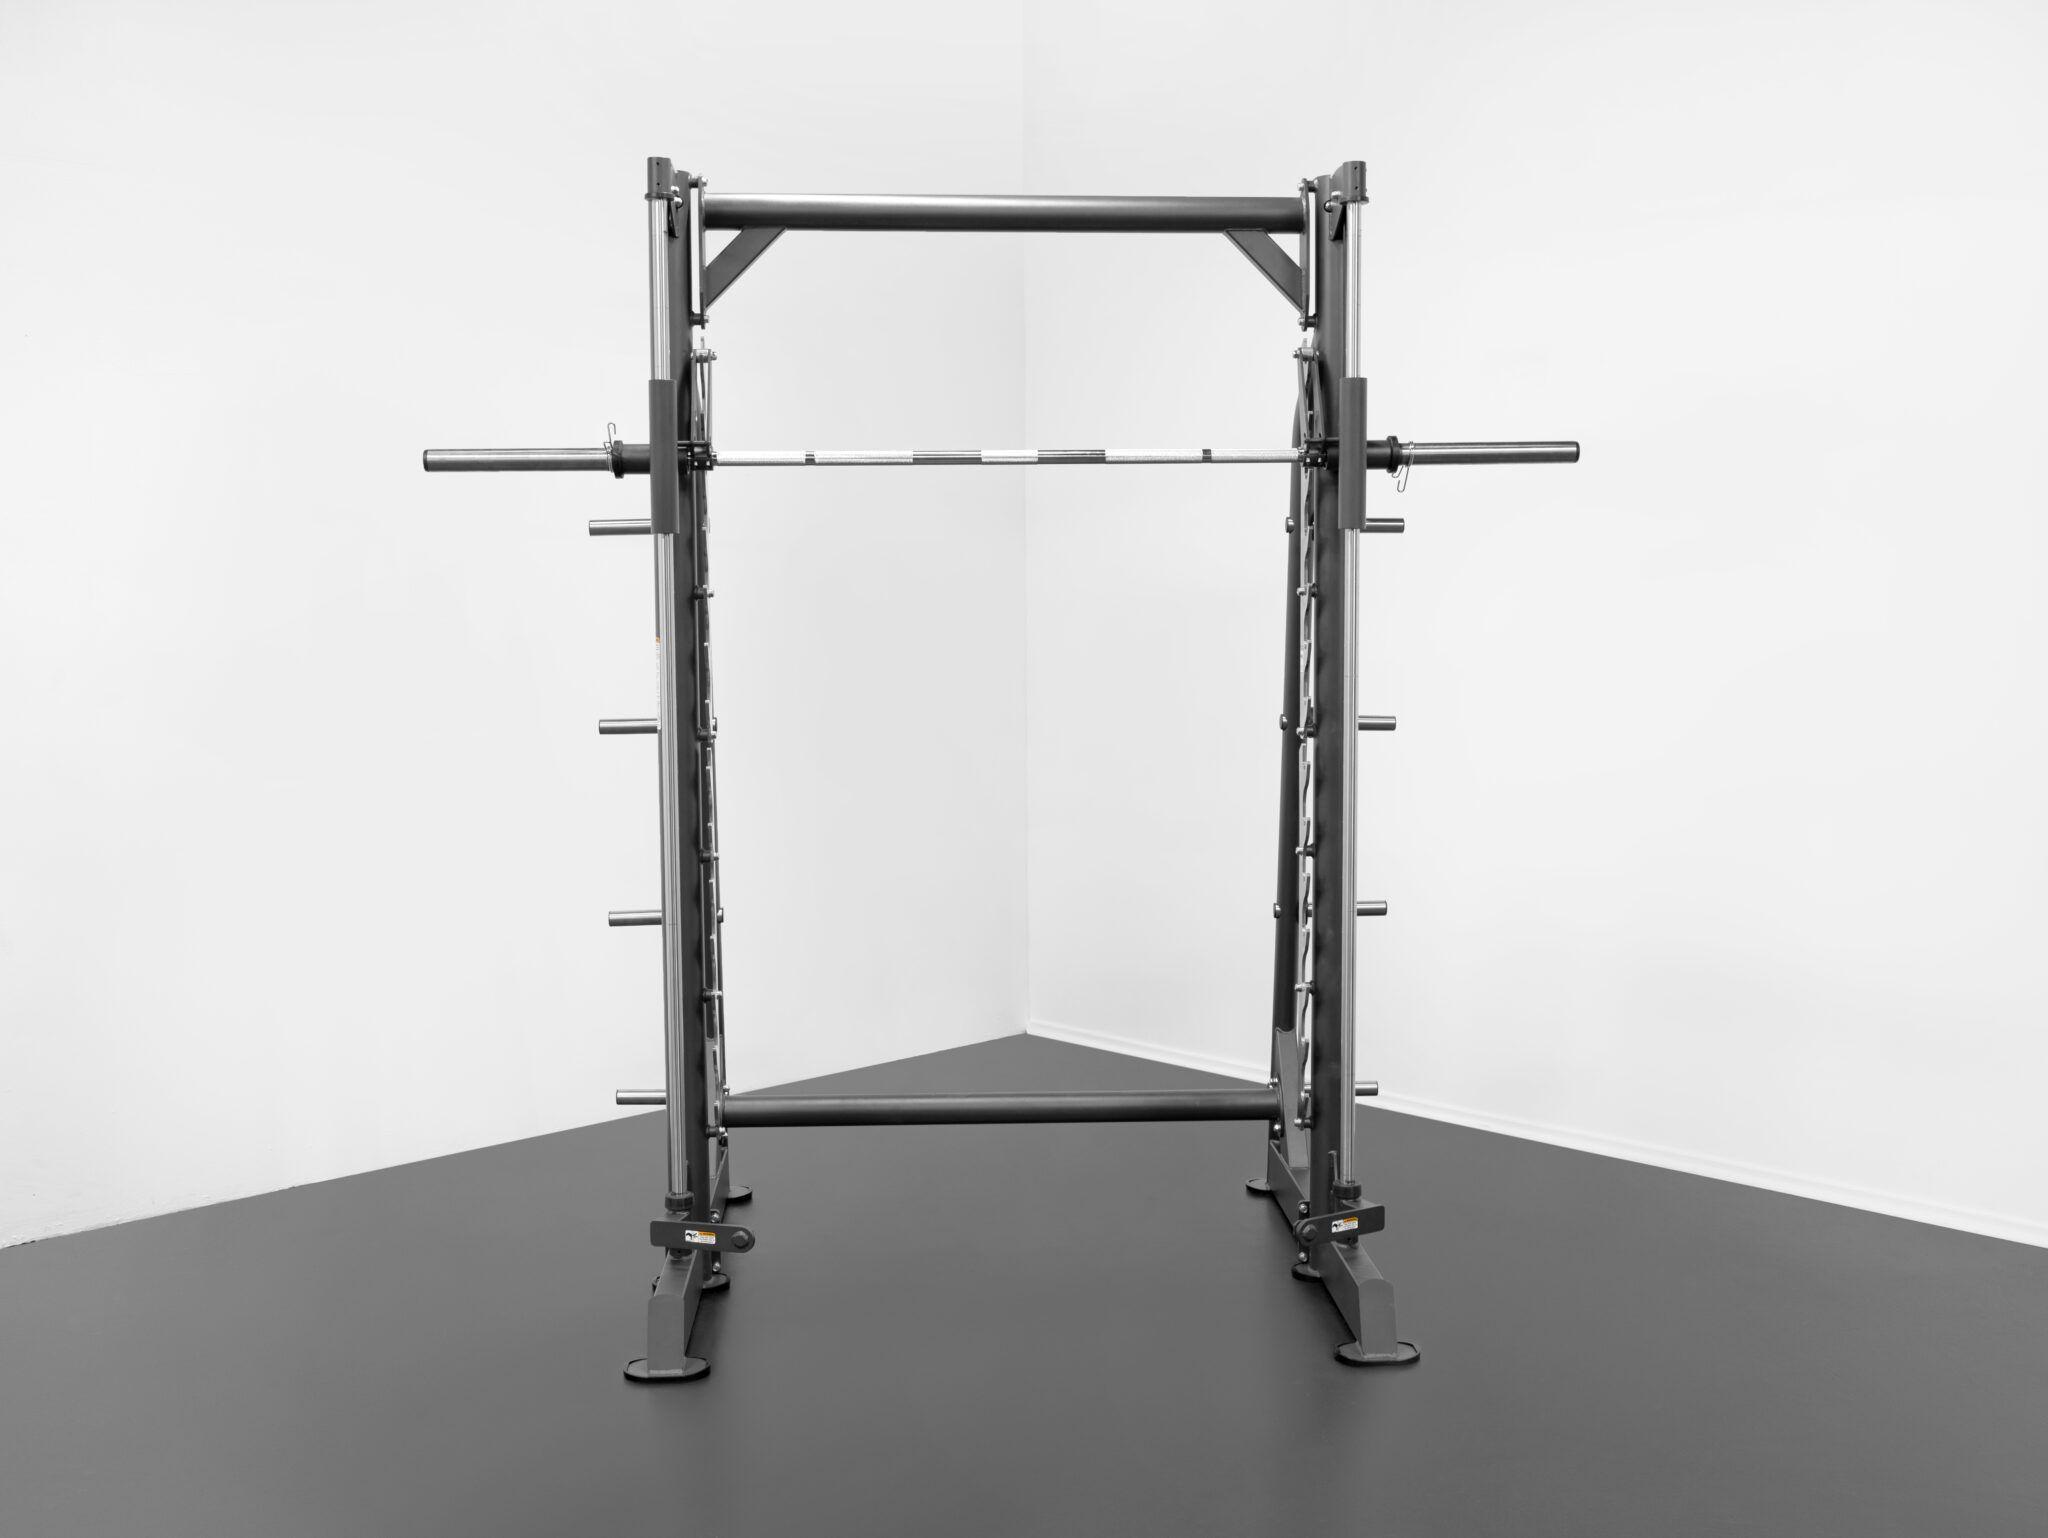 Frame made with 3.5” Oval Rolled Steel Tubing – Rated over 1000lbs